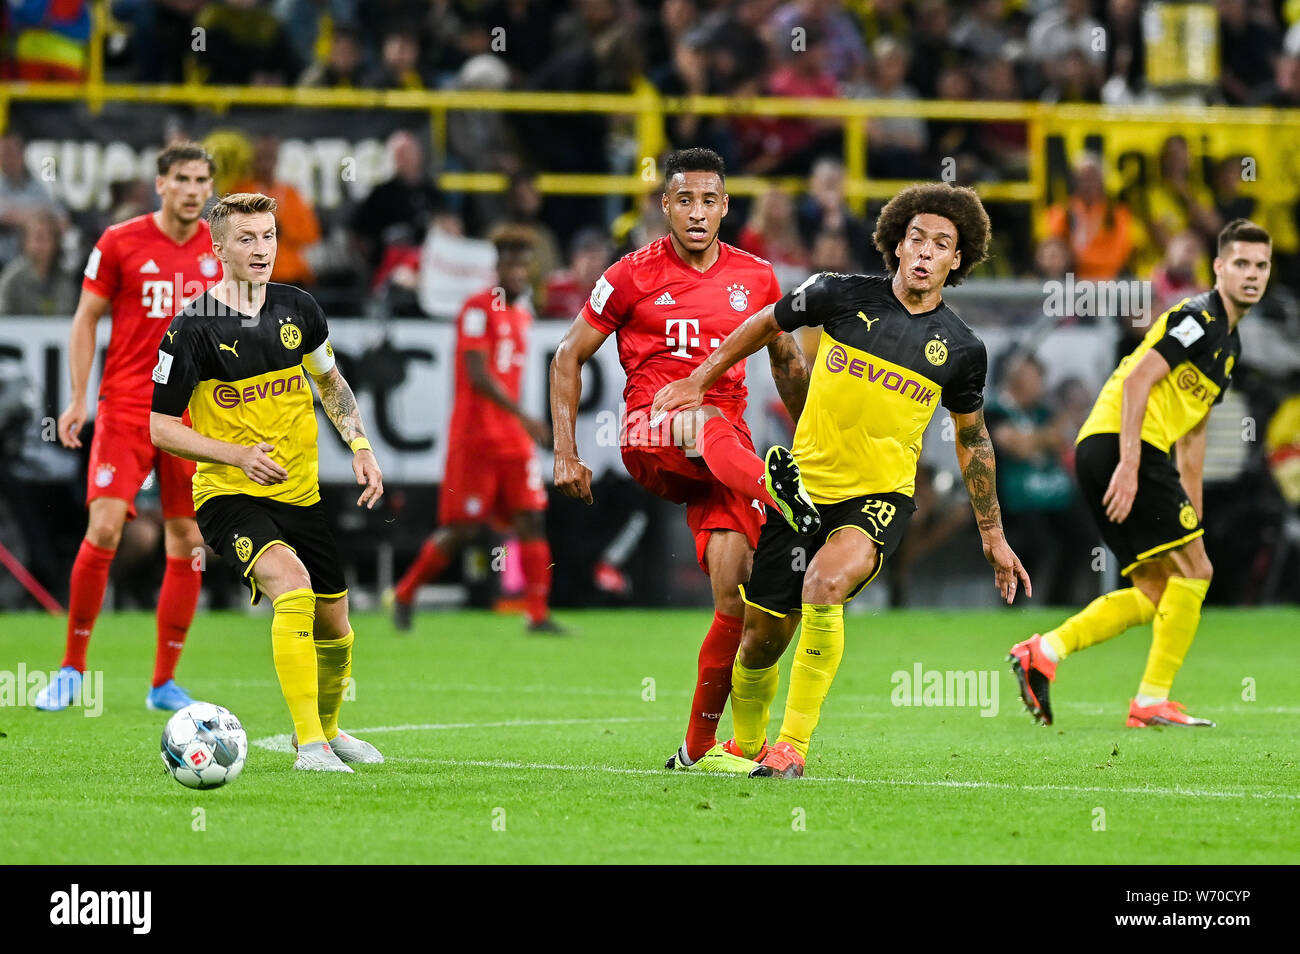 Marco Reus from Borussia Dortmund (L) Corentin Tolisso from Bayern Munich (C) and Axel Witsel from Borussia Dortmund (R) are seen in action during the Germany Supercup Final 2019 match between Borussia Dortmund and Bayern Munich.(Final score: Borussia Dortmund 2:0 Bayern Munich) Stock Photo